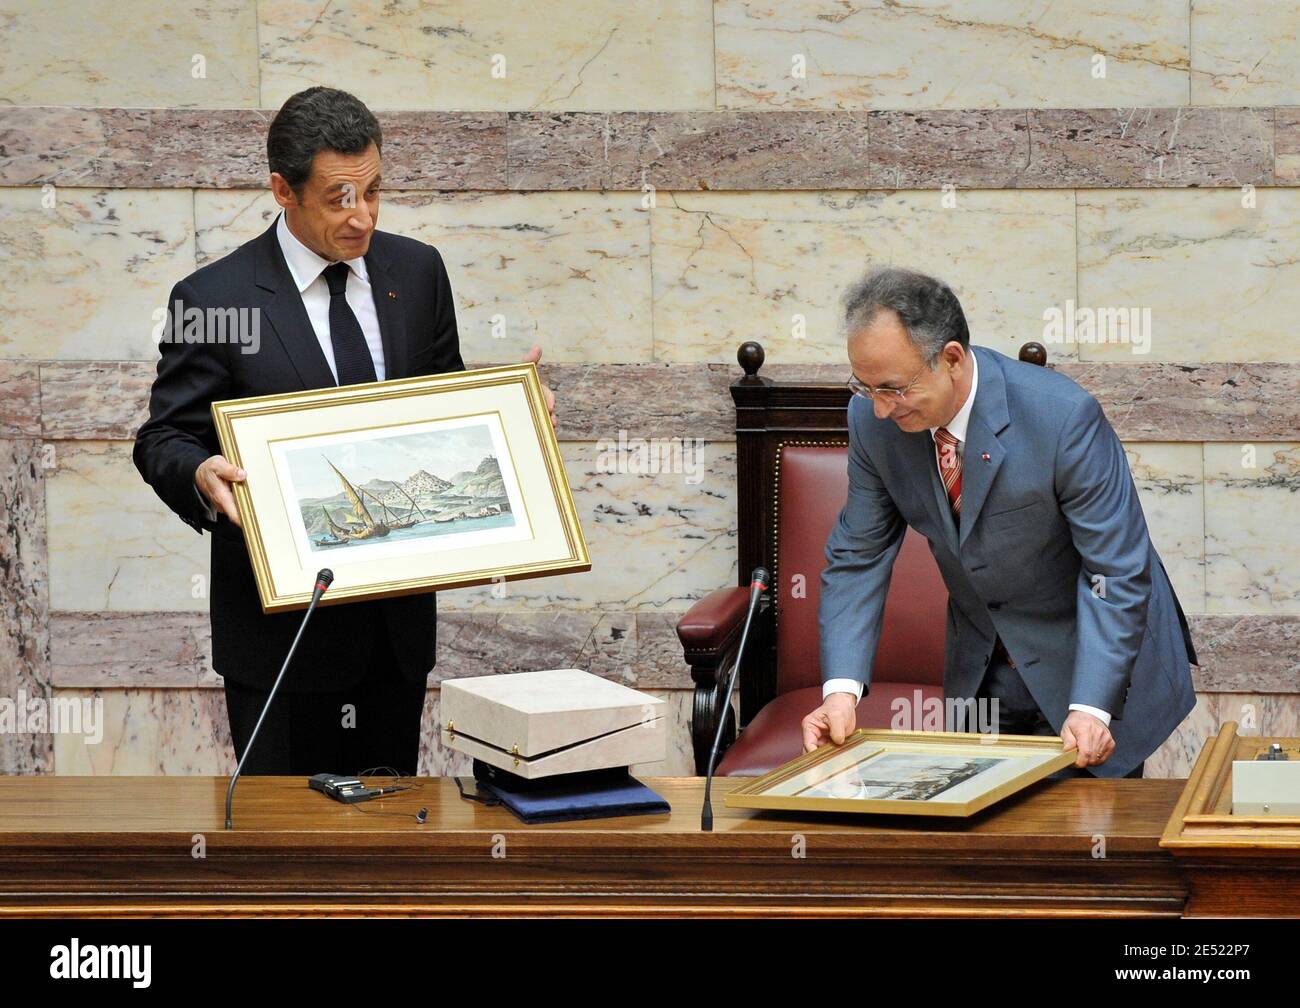 Speaker of the Greek parliament Dimitri Sioufas greets French President Nicolas Sarkozy at the parliament in Athens in Athens, Greece on June 6, 2008. Sarkozy arrived in Greece Friday for an official visit, the first by a French head of state in more than 25 years. Sarkozy was addressing the Greek parliament in a ceremony only accorded to three foreign presidents in the past: his predecessor Charles de Gaulle and US presidents Dwight Eisenhower and George Bush Sr. Photo by Mousse/ABACAPRESS.COM Stock Photo